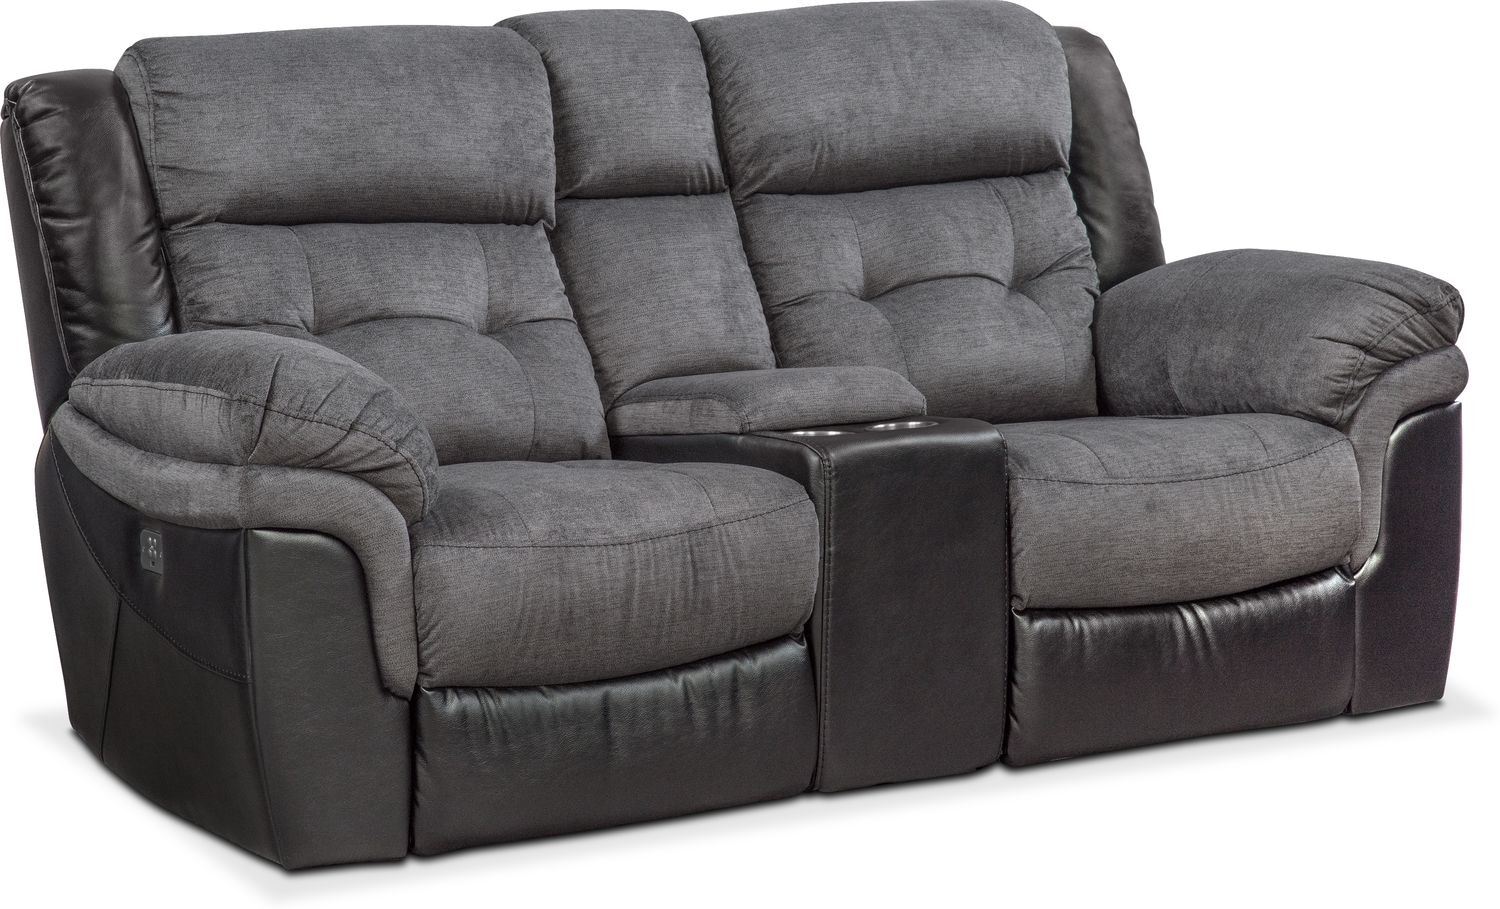 Tacoma Dual Power Reclining Loveseat with Console - Black